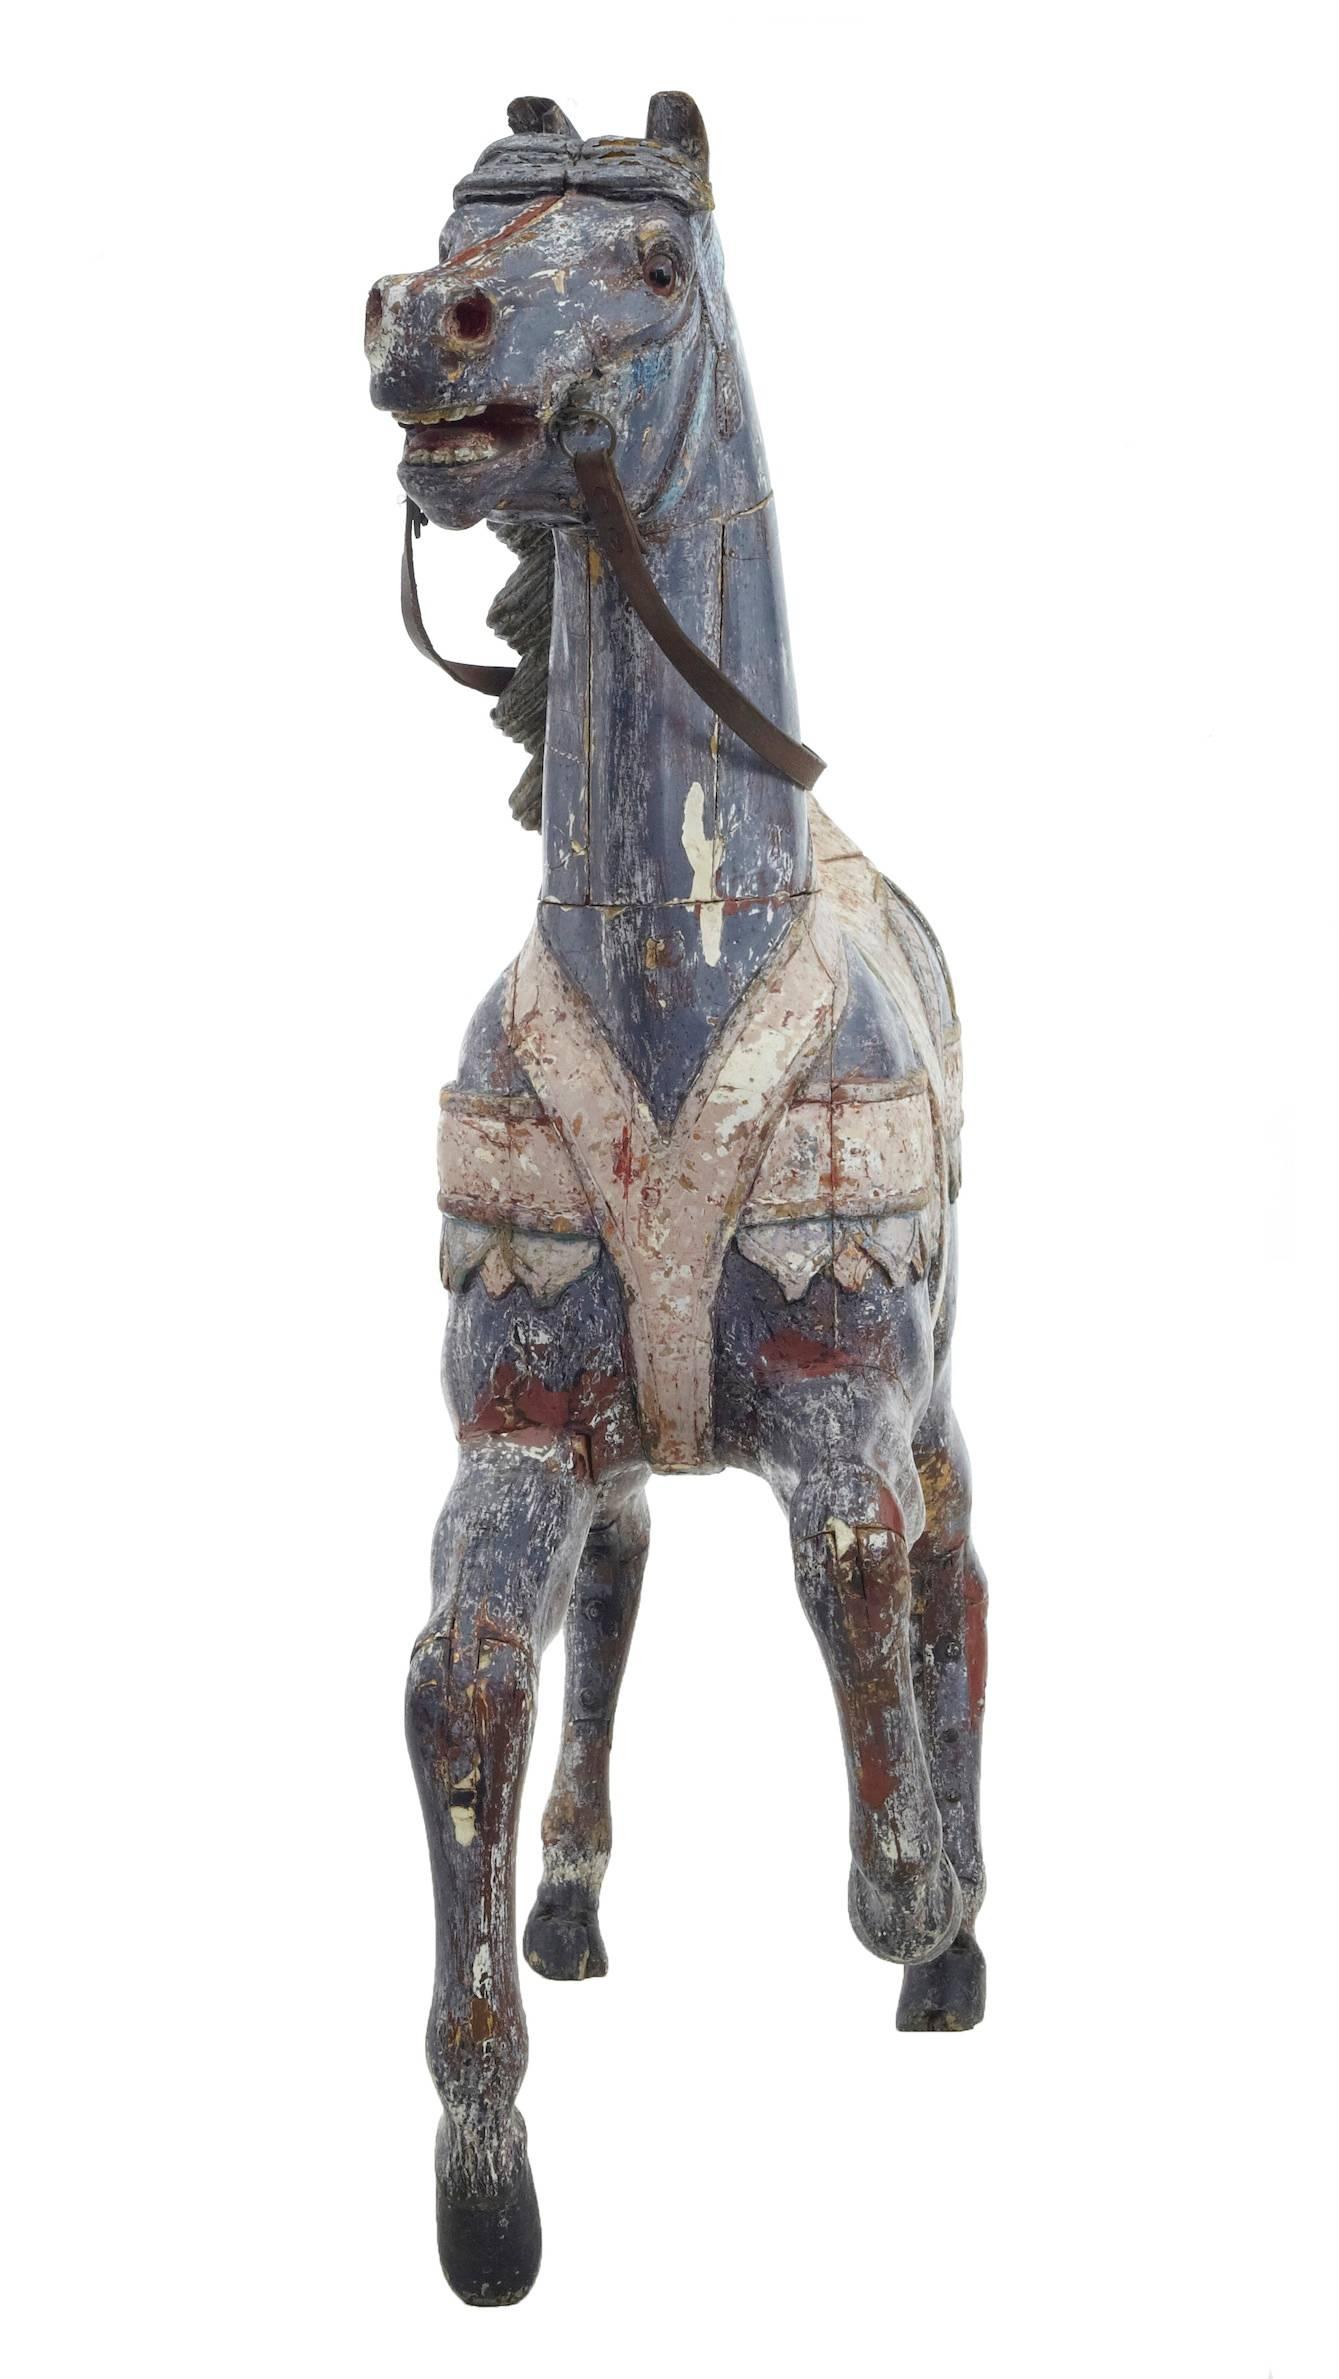 Unique continental painted merry-go-round horse, circa 1900.
Excellent opportunity to own this highly decorative item.
Now with its original coats of decorative paint dry stripped back which gives its current appearance.
With restorations to head